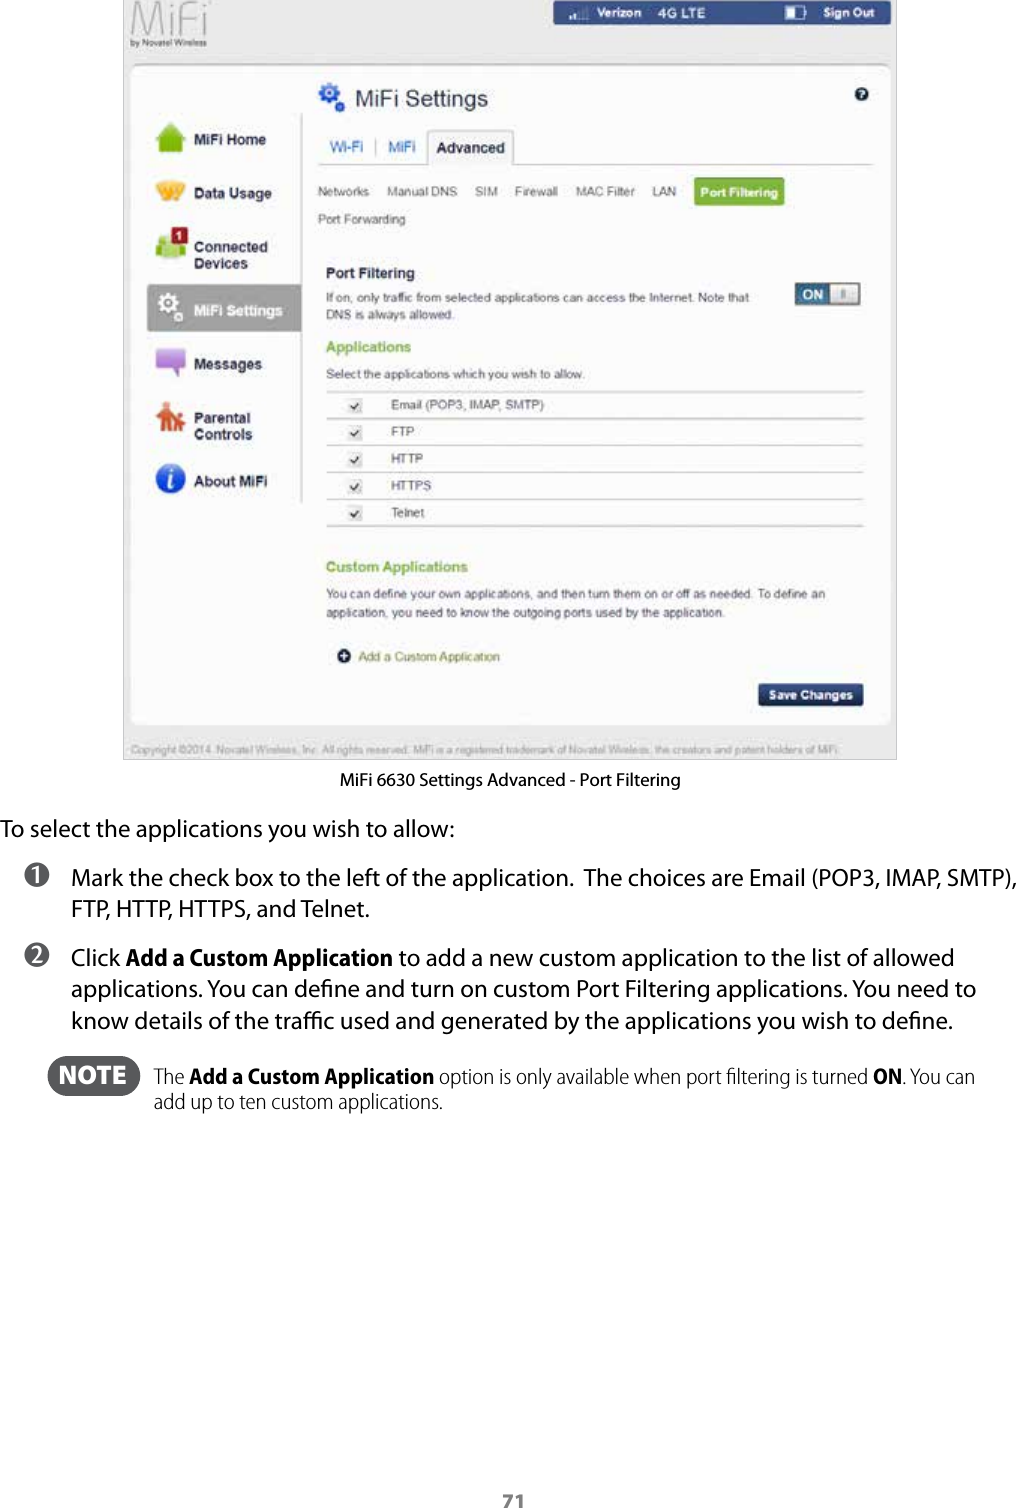 71MiFi 6630 Settings Advanced - Port FilteringTo select the applications you wish to allow: ➊ Mark the check box to the left of the application.  The choices are Email (POP3, IMAP, SMTP), FTP, HTTP, HTTPS, and Telnet. ➋ Click Add a Custom Application to add a new custom application to the list of allowed applications. You can dene and turn on custom Port Filtering applications. You need to know details of the trac used and generated by the applications you wish to dene.   NOTE    The Add a Custom Application option is only available when port ﬁltering is turned ON. You can add up to ten custom applications.